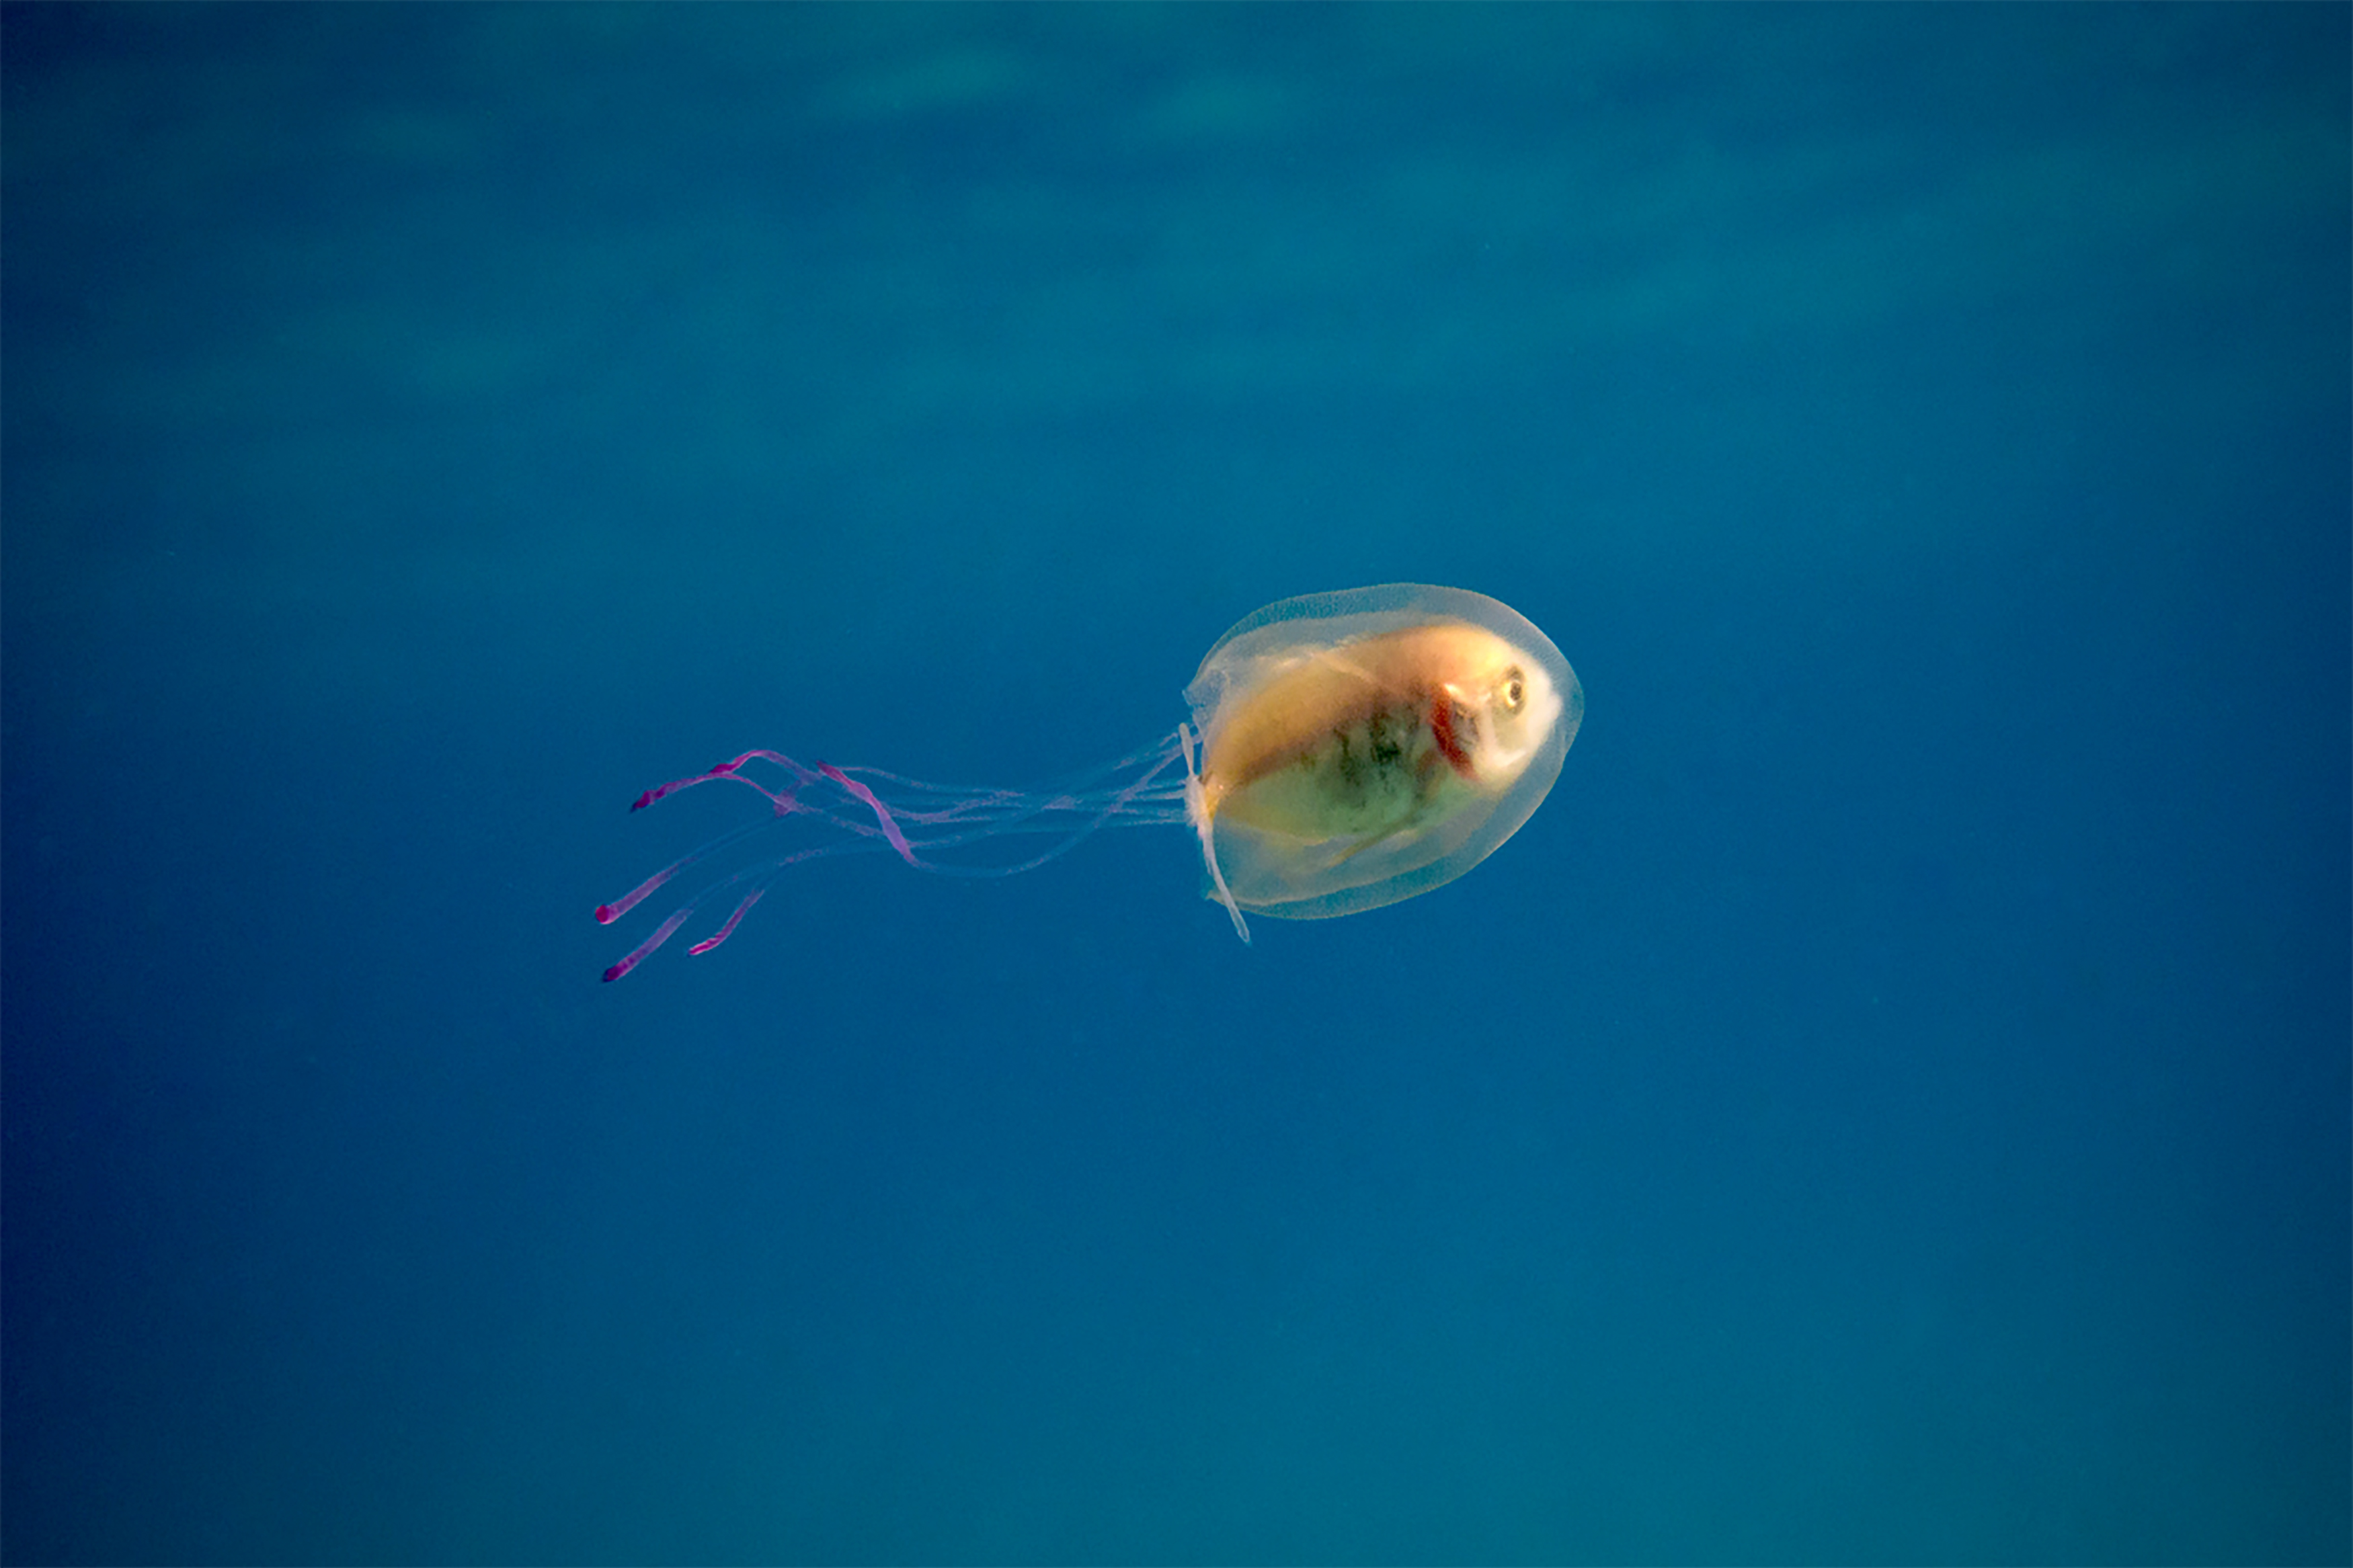 This undated handout picture taken by Tim Samuel and provided through his instagram account www.instagram.com/timsamuelphotography shows a small fish swimming inside the belly of a jellyfish off the coast of Byron Bay in New South Wales, eastern Australia. A fish has been pictured swimming inside a jellyfish off Australia's east coast in a remarkable and rare image that has gone viral, with more than two million online views. Underwater photographer Tim Samuel was in the water with a friend near popular tourist resort Byron Bay in December when they came across the little creature trapped inside the only slightly larger jellyfish. / AFP PHOTO / www.instagram.com/timsamuelphotography / Tim Samuel Photography / ----EDITORS NOTE ----RESTRICTED TO EDITORIAL USE MANDATORY CREDIT " AFP PHOTO / TIM SAMUEL/WWW.INSTAGRAM.COM/TIMSAMUELPHOTOGRAPHY" NO MARKETING NO ADVERTISING CAMPAIGNS - DISTRIBUTED AS A SERVICE TO CLIENTS- NO ARCHIVES